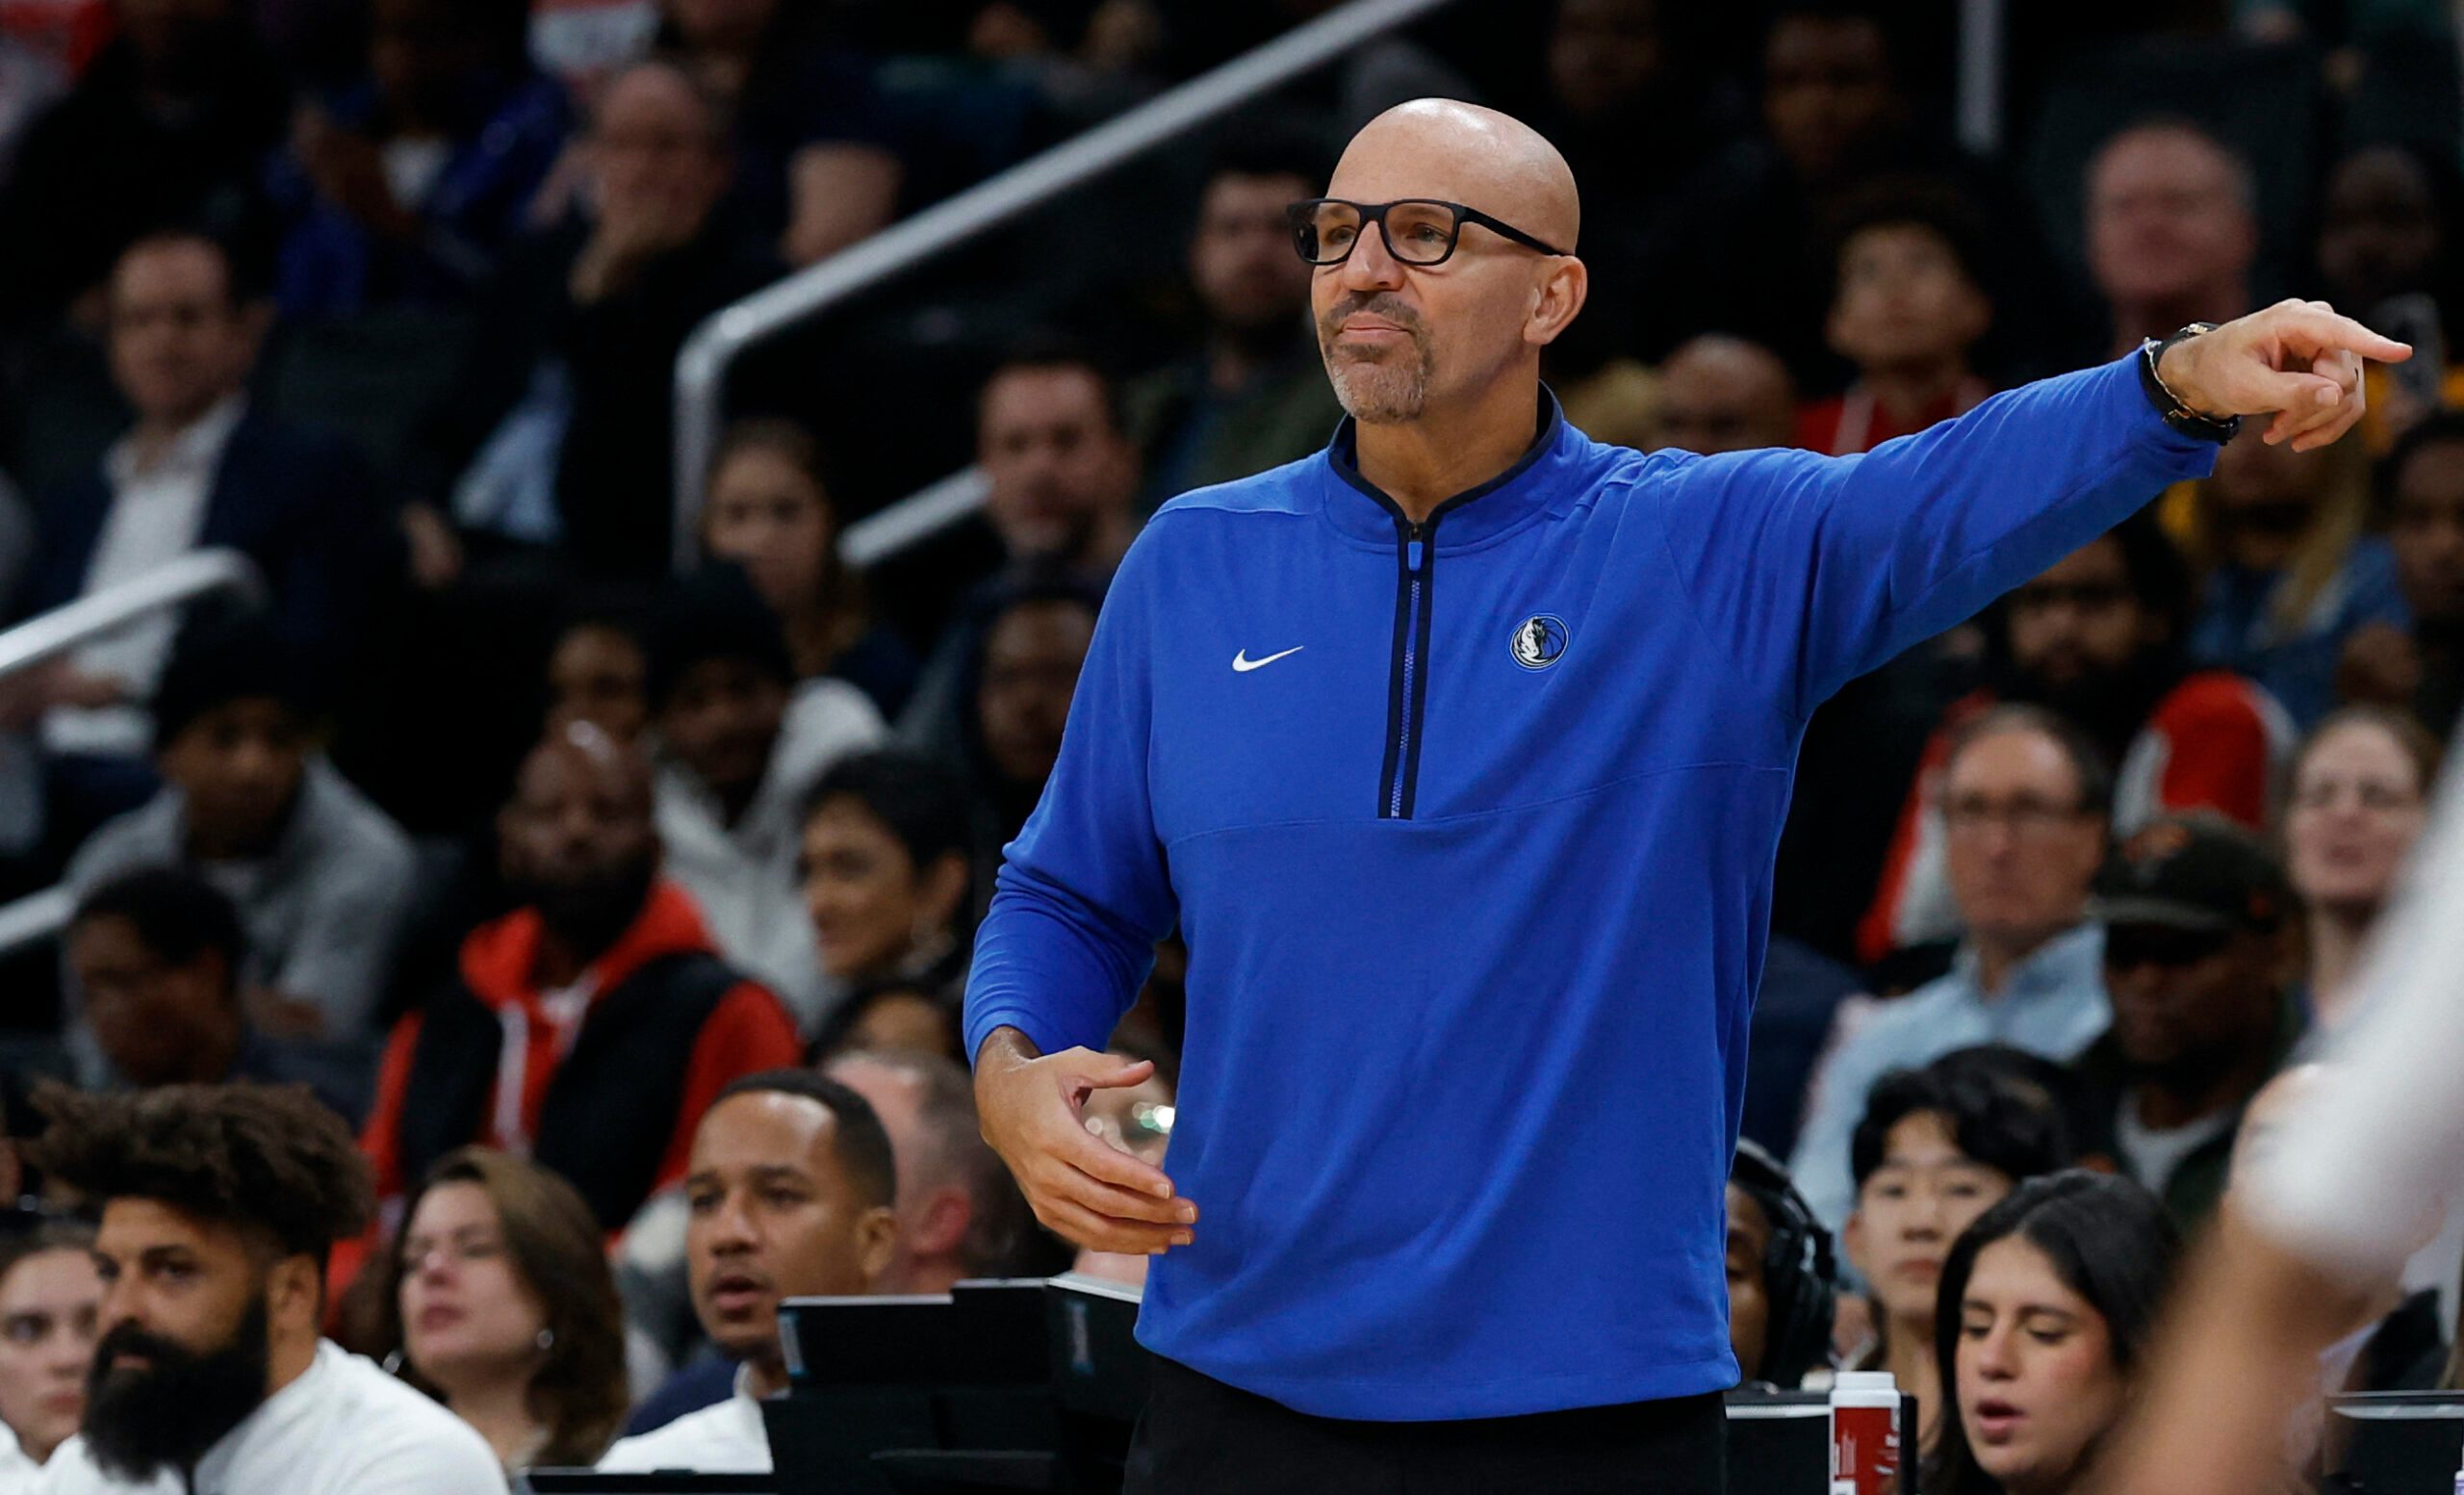 Mavs coach Jason Kidd abandons press conference after spat with reporter